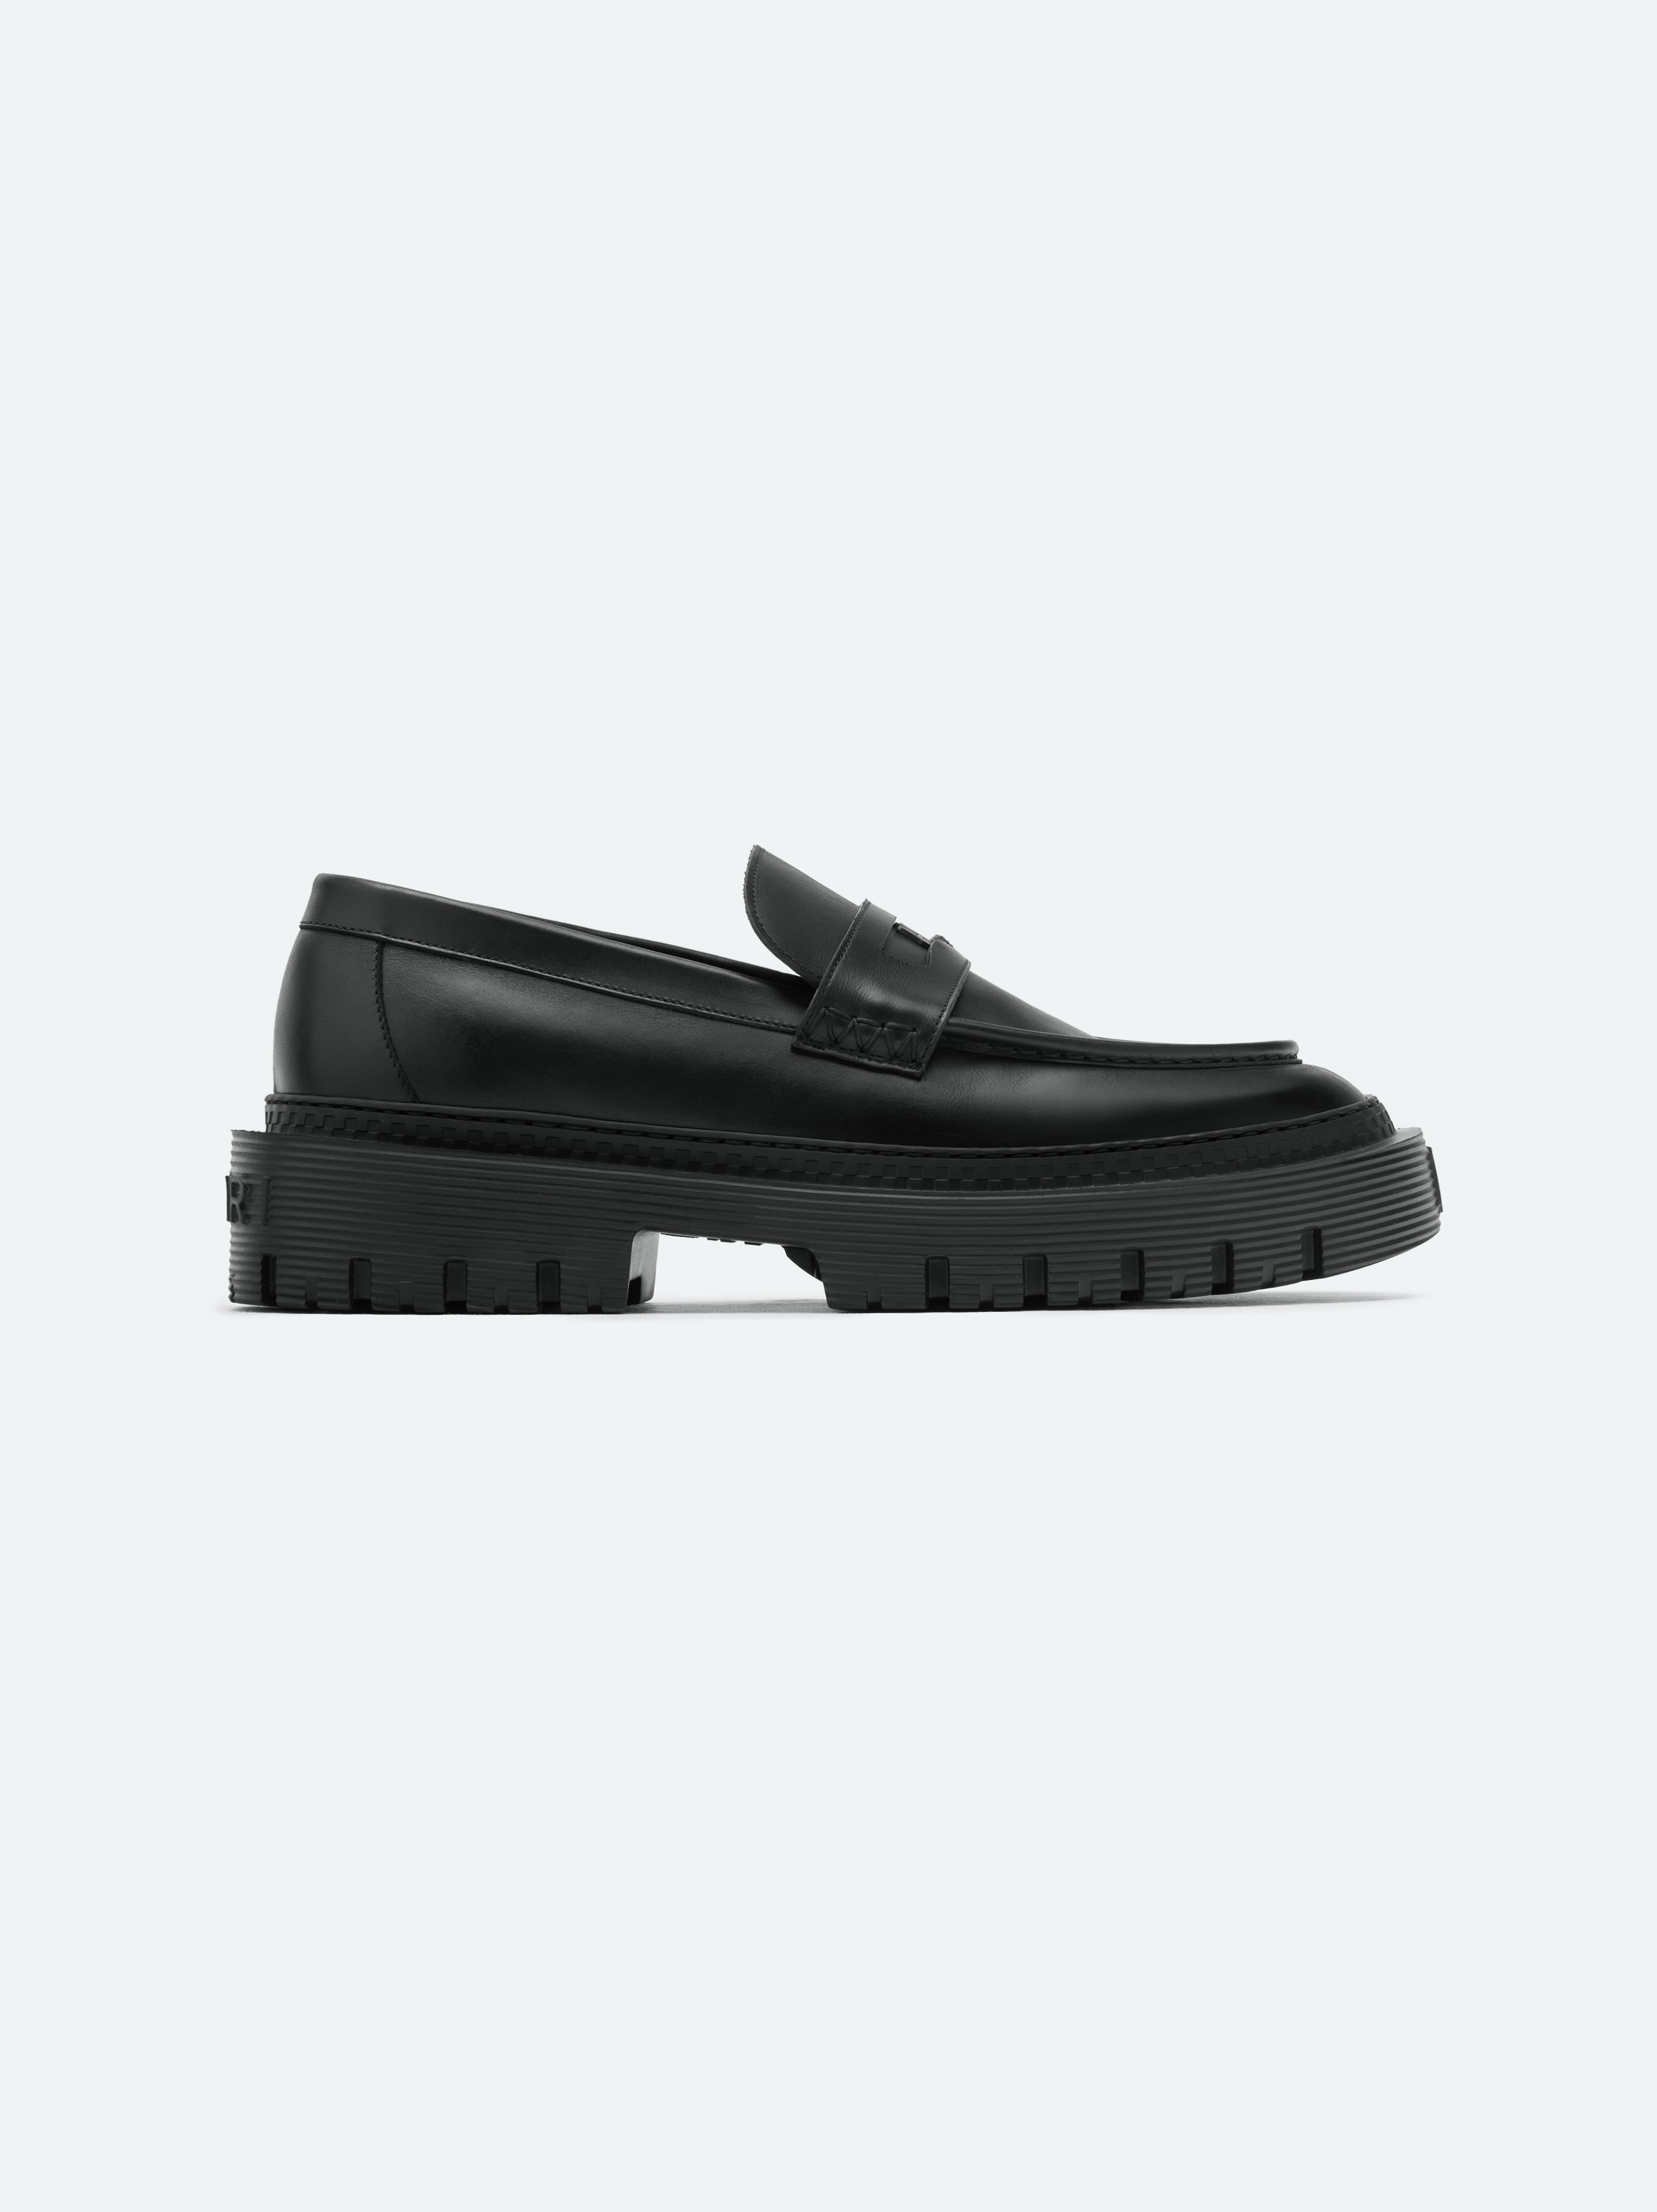 Product AMIRI CHUNKY LOAFER - Black featured image